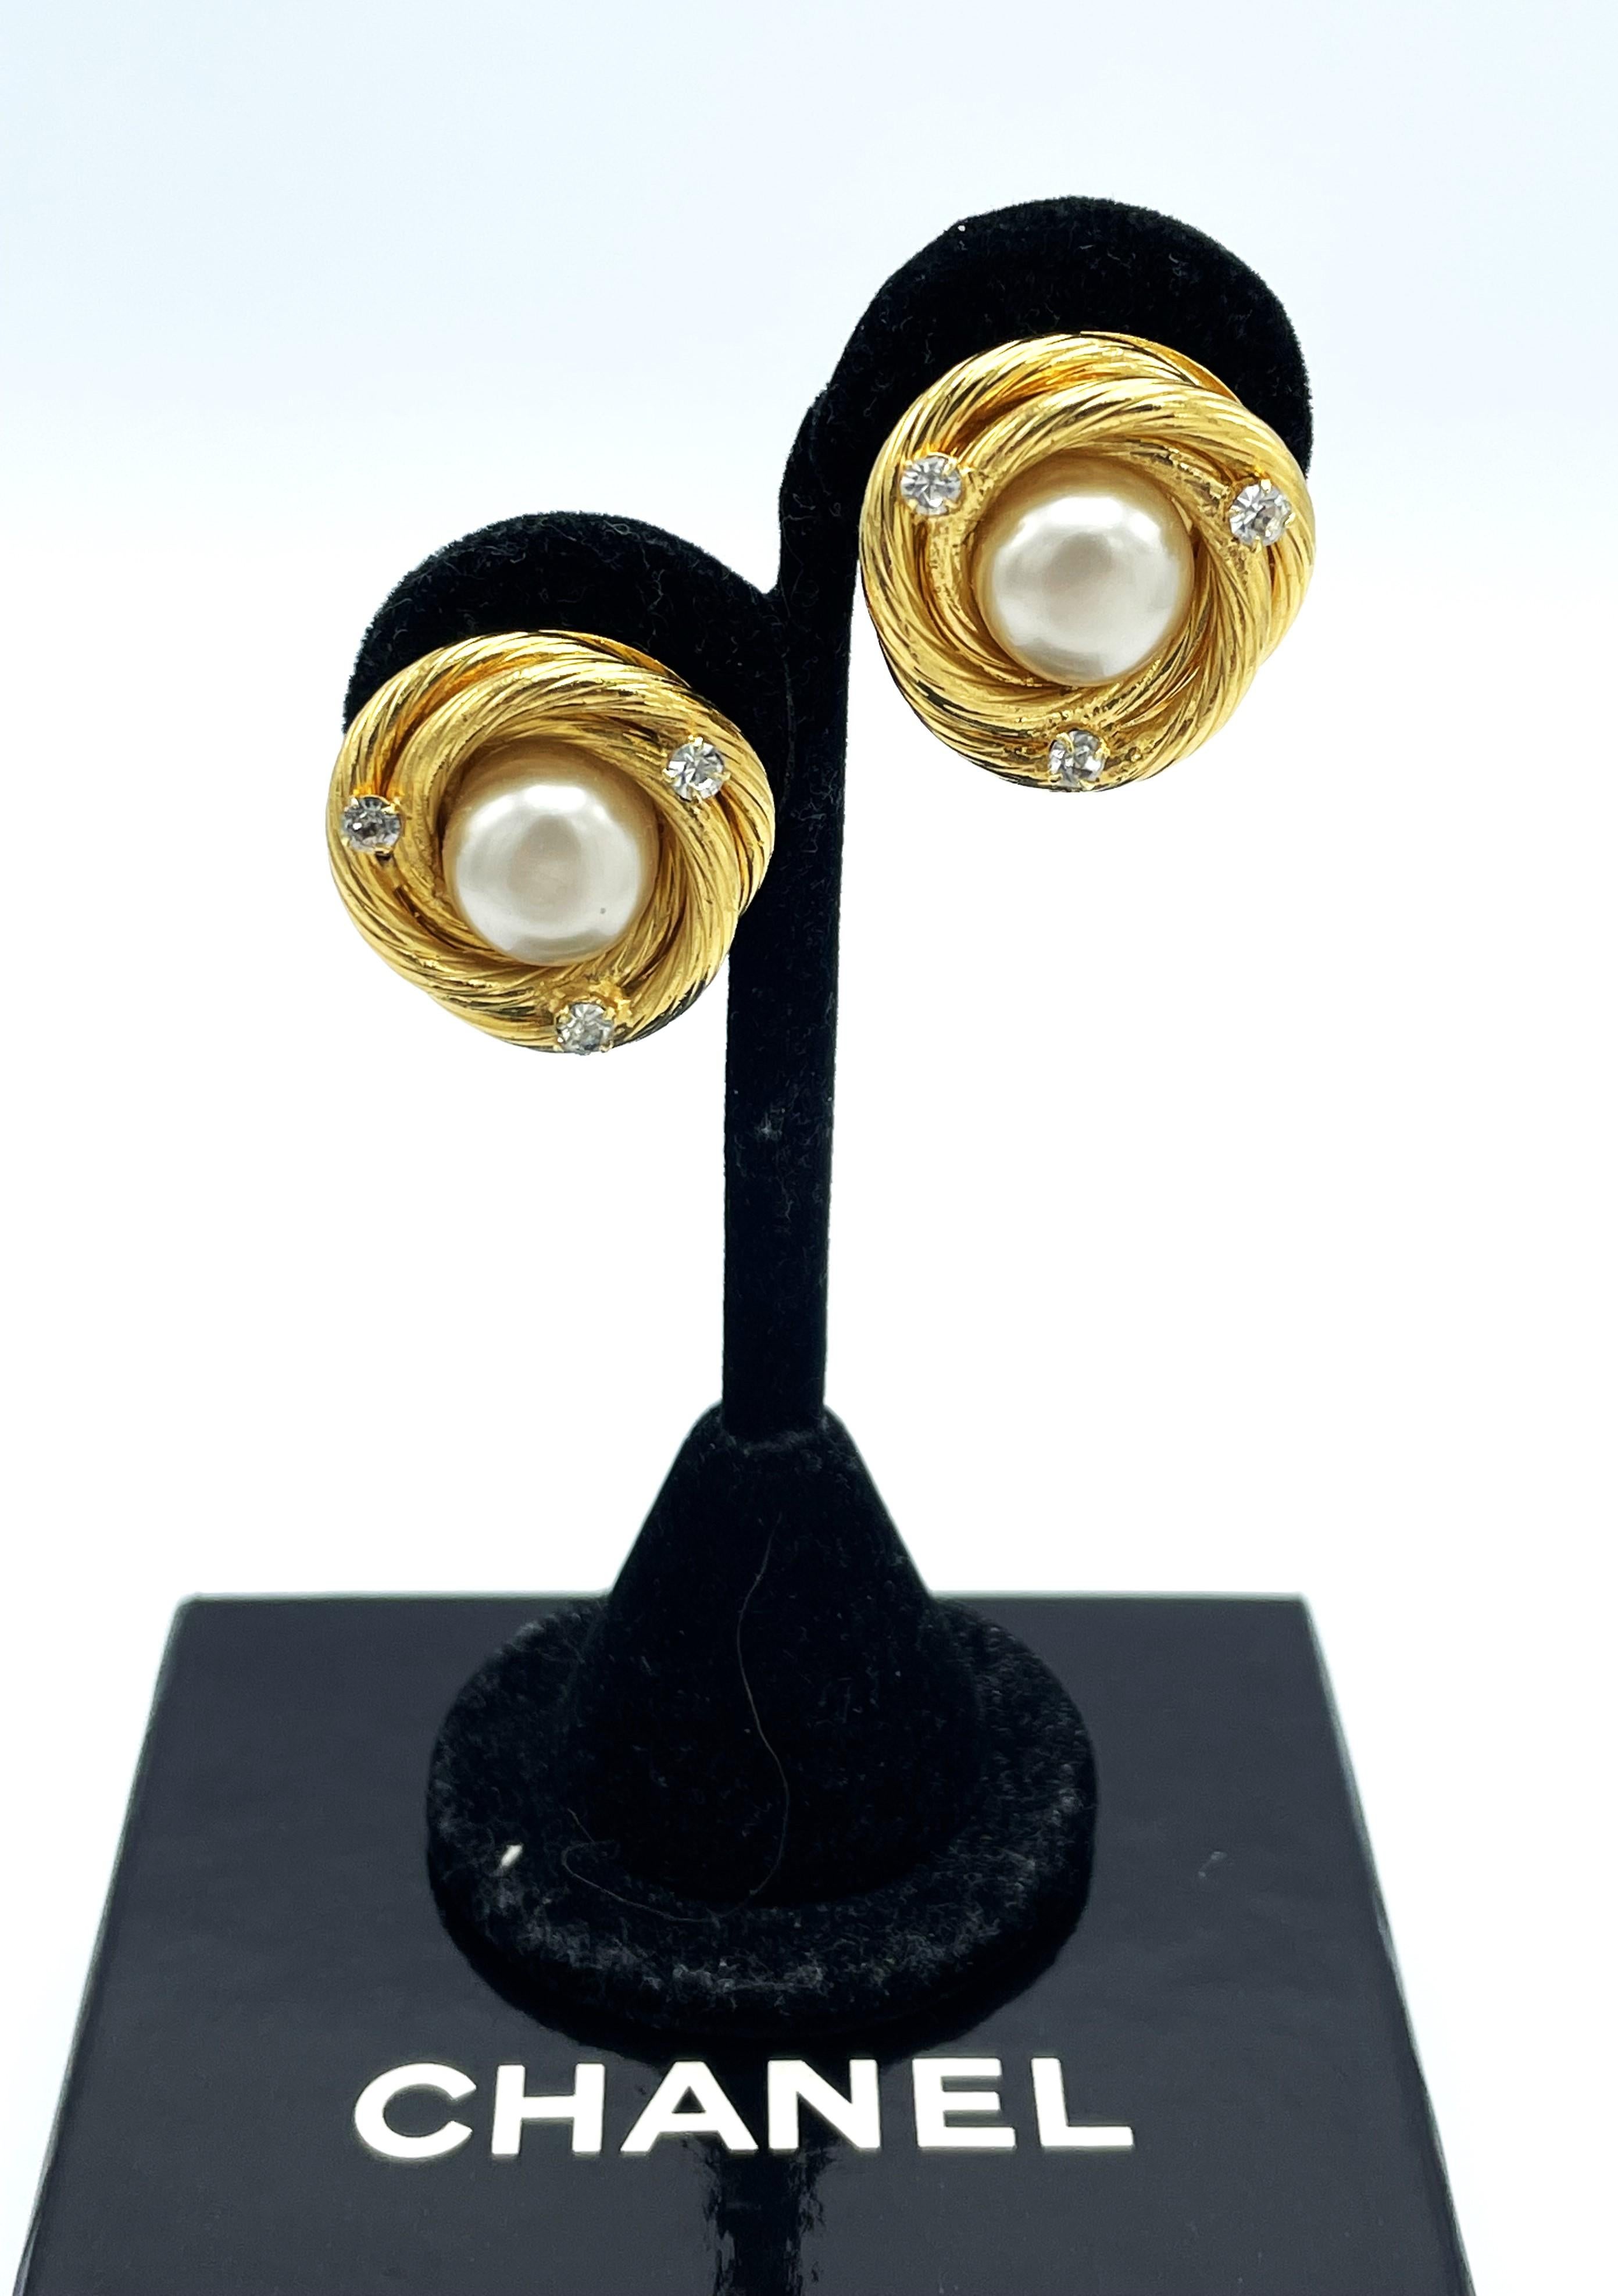 ICONIC CHANEL Clip-on earring, larg pearl with classic gold cord signed, 1995 P For Sale 3